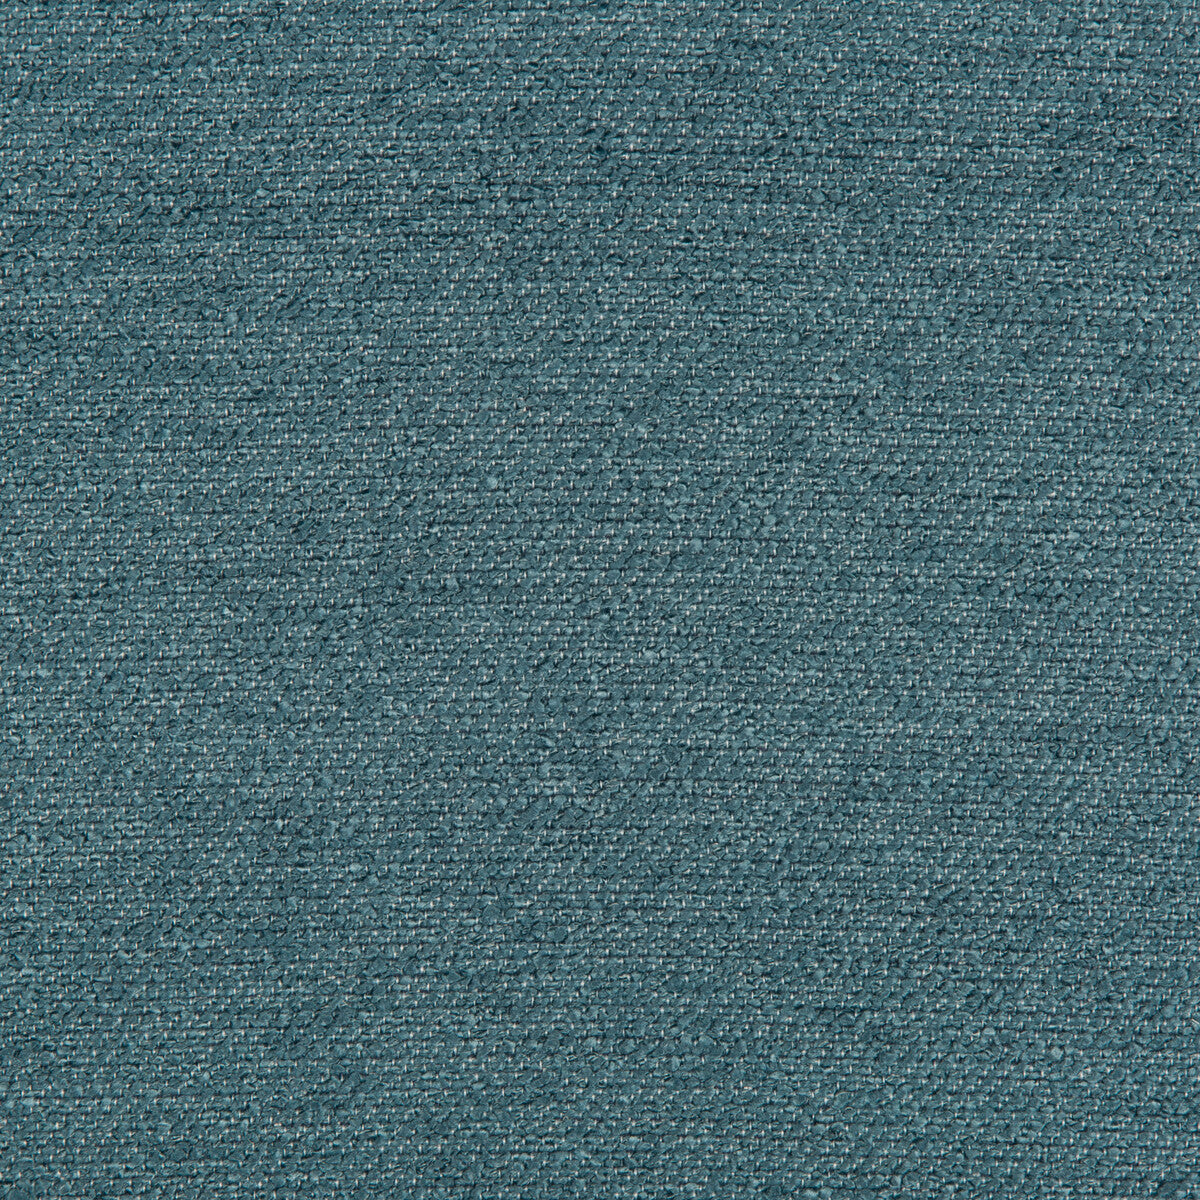 Kravet Design fabric in 35143-53 color - pattern 35143.53.0 - by Kravet Design in the Performance Crypton Home collection